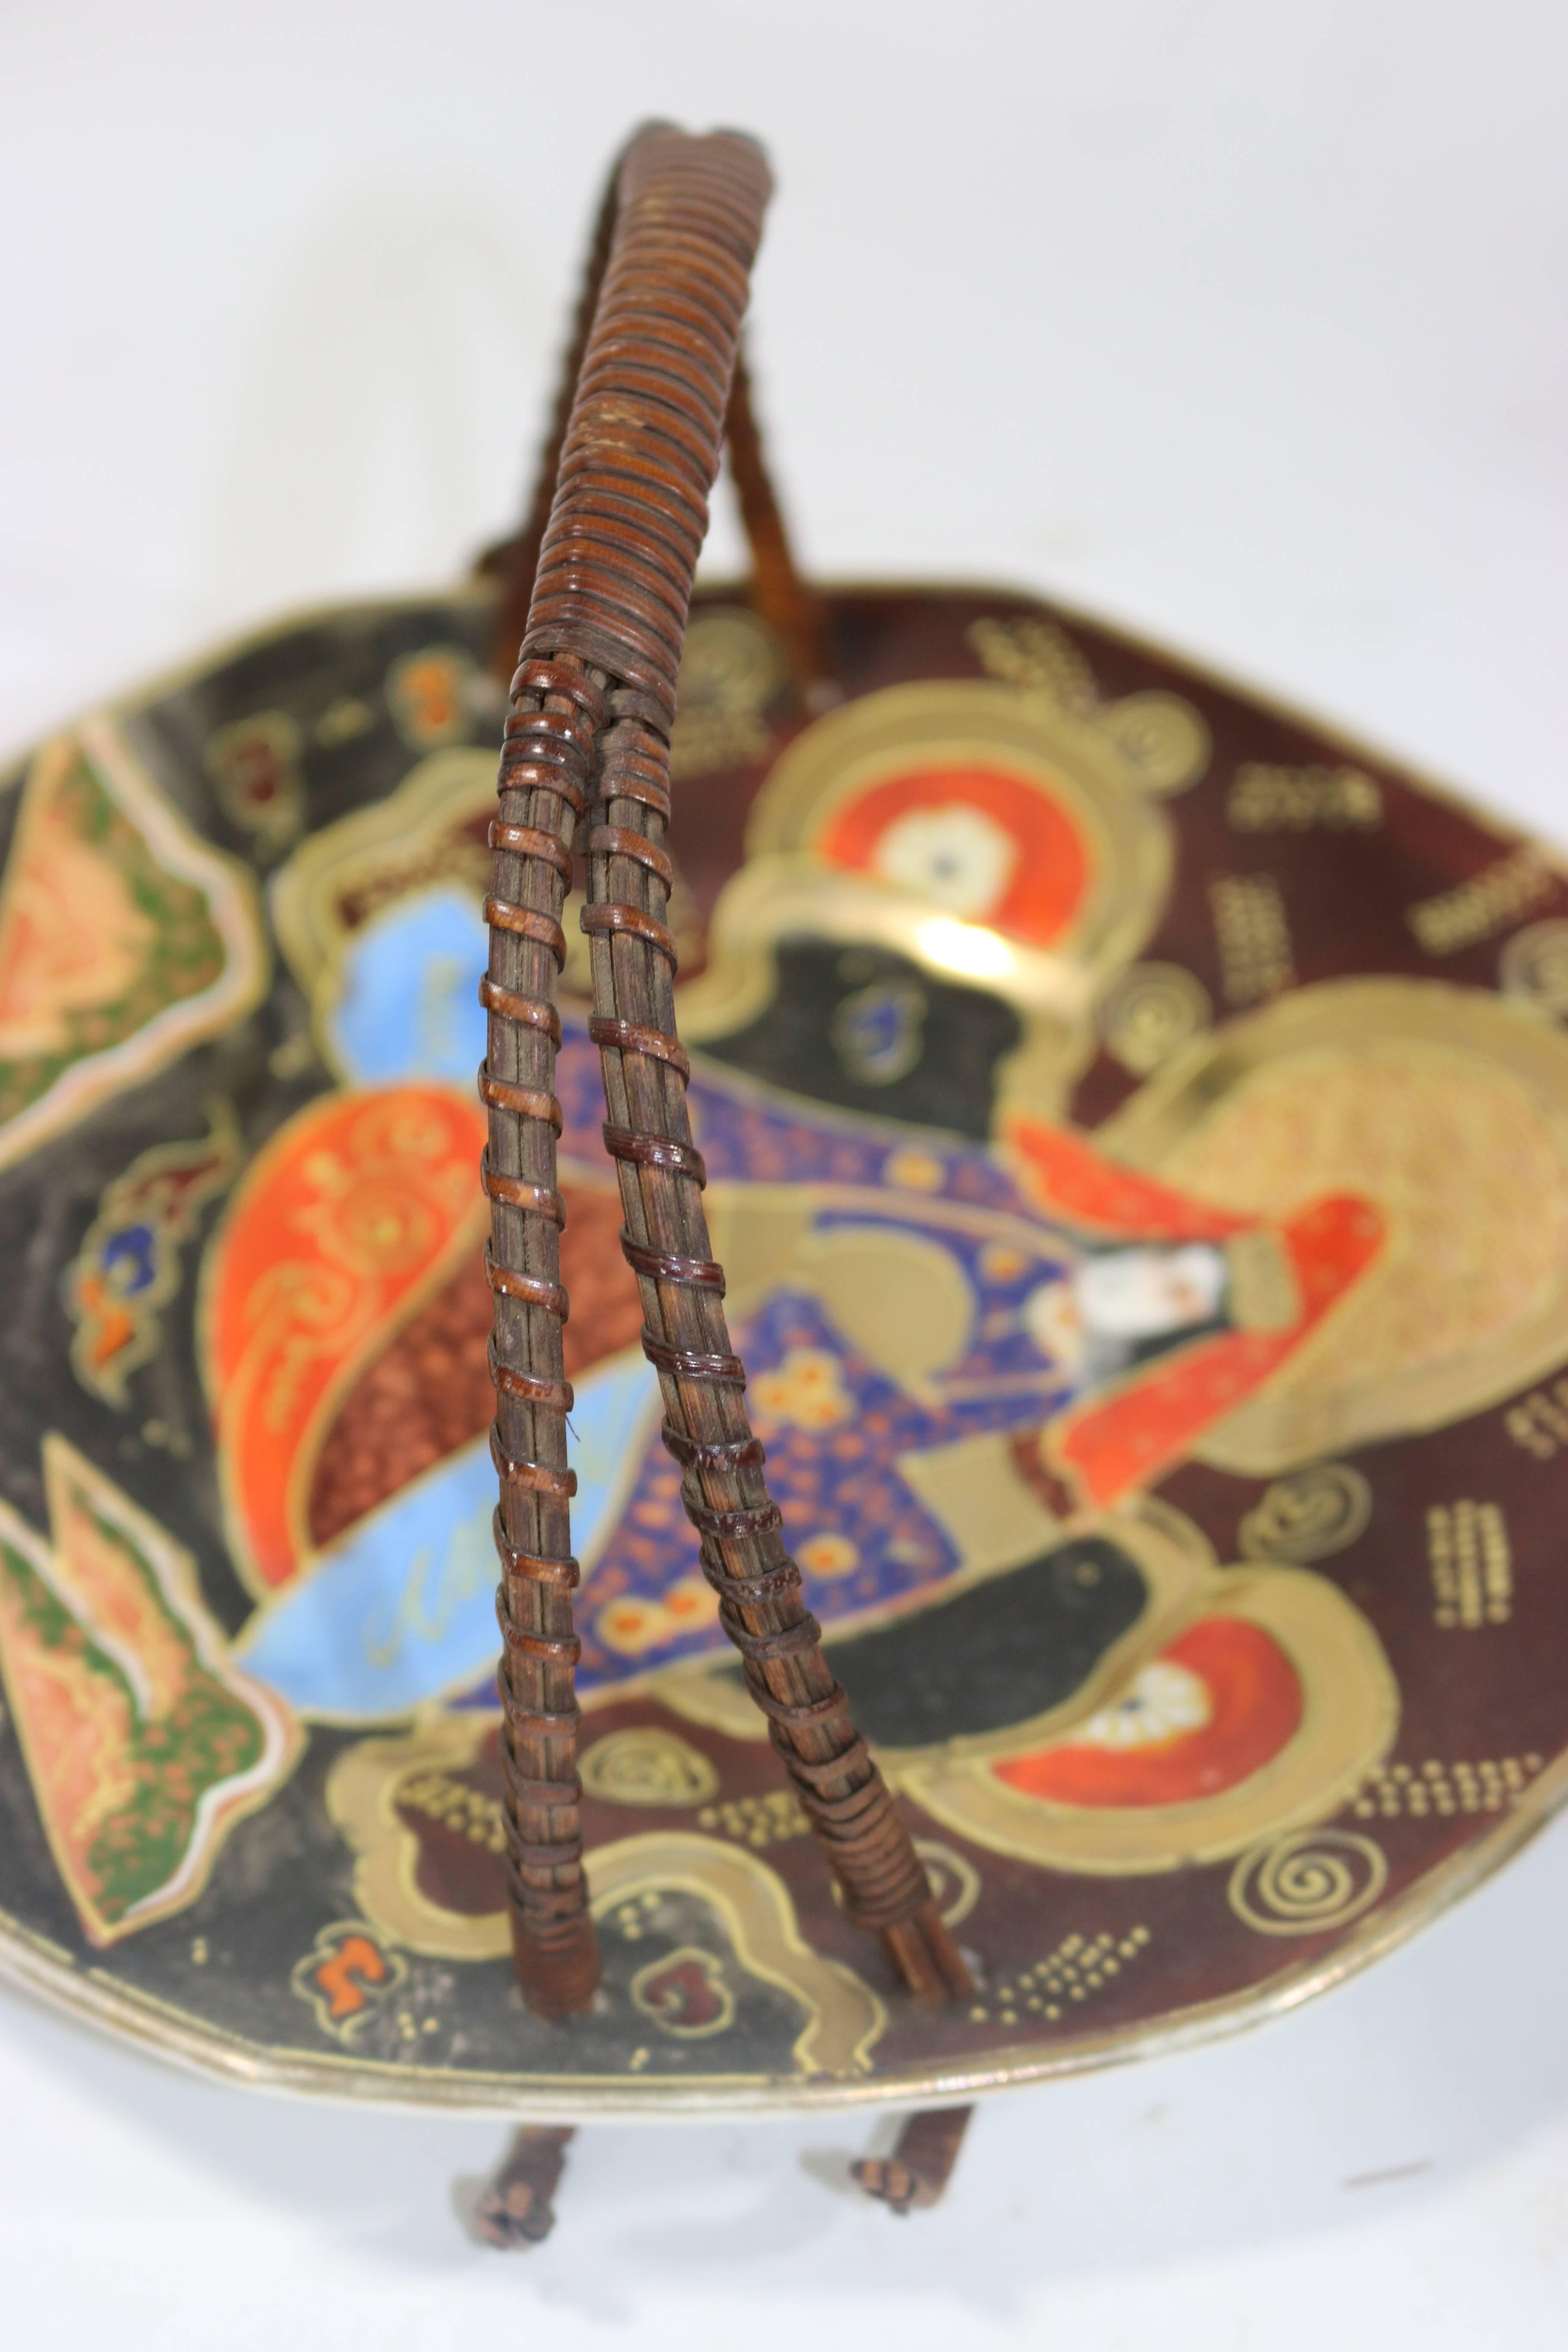 Highly decorative beautiful vintage serving plate or bowl - Japanese Satsuma woven handle with relief decoration, painted, enameled gilt surfaces covered with continuous mythological scene in relief- outlined Empress in flowing robe, with clouds,